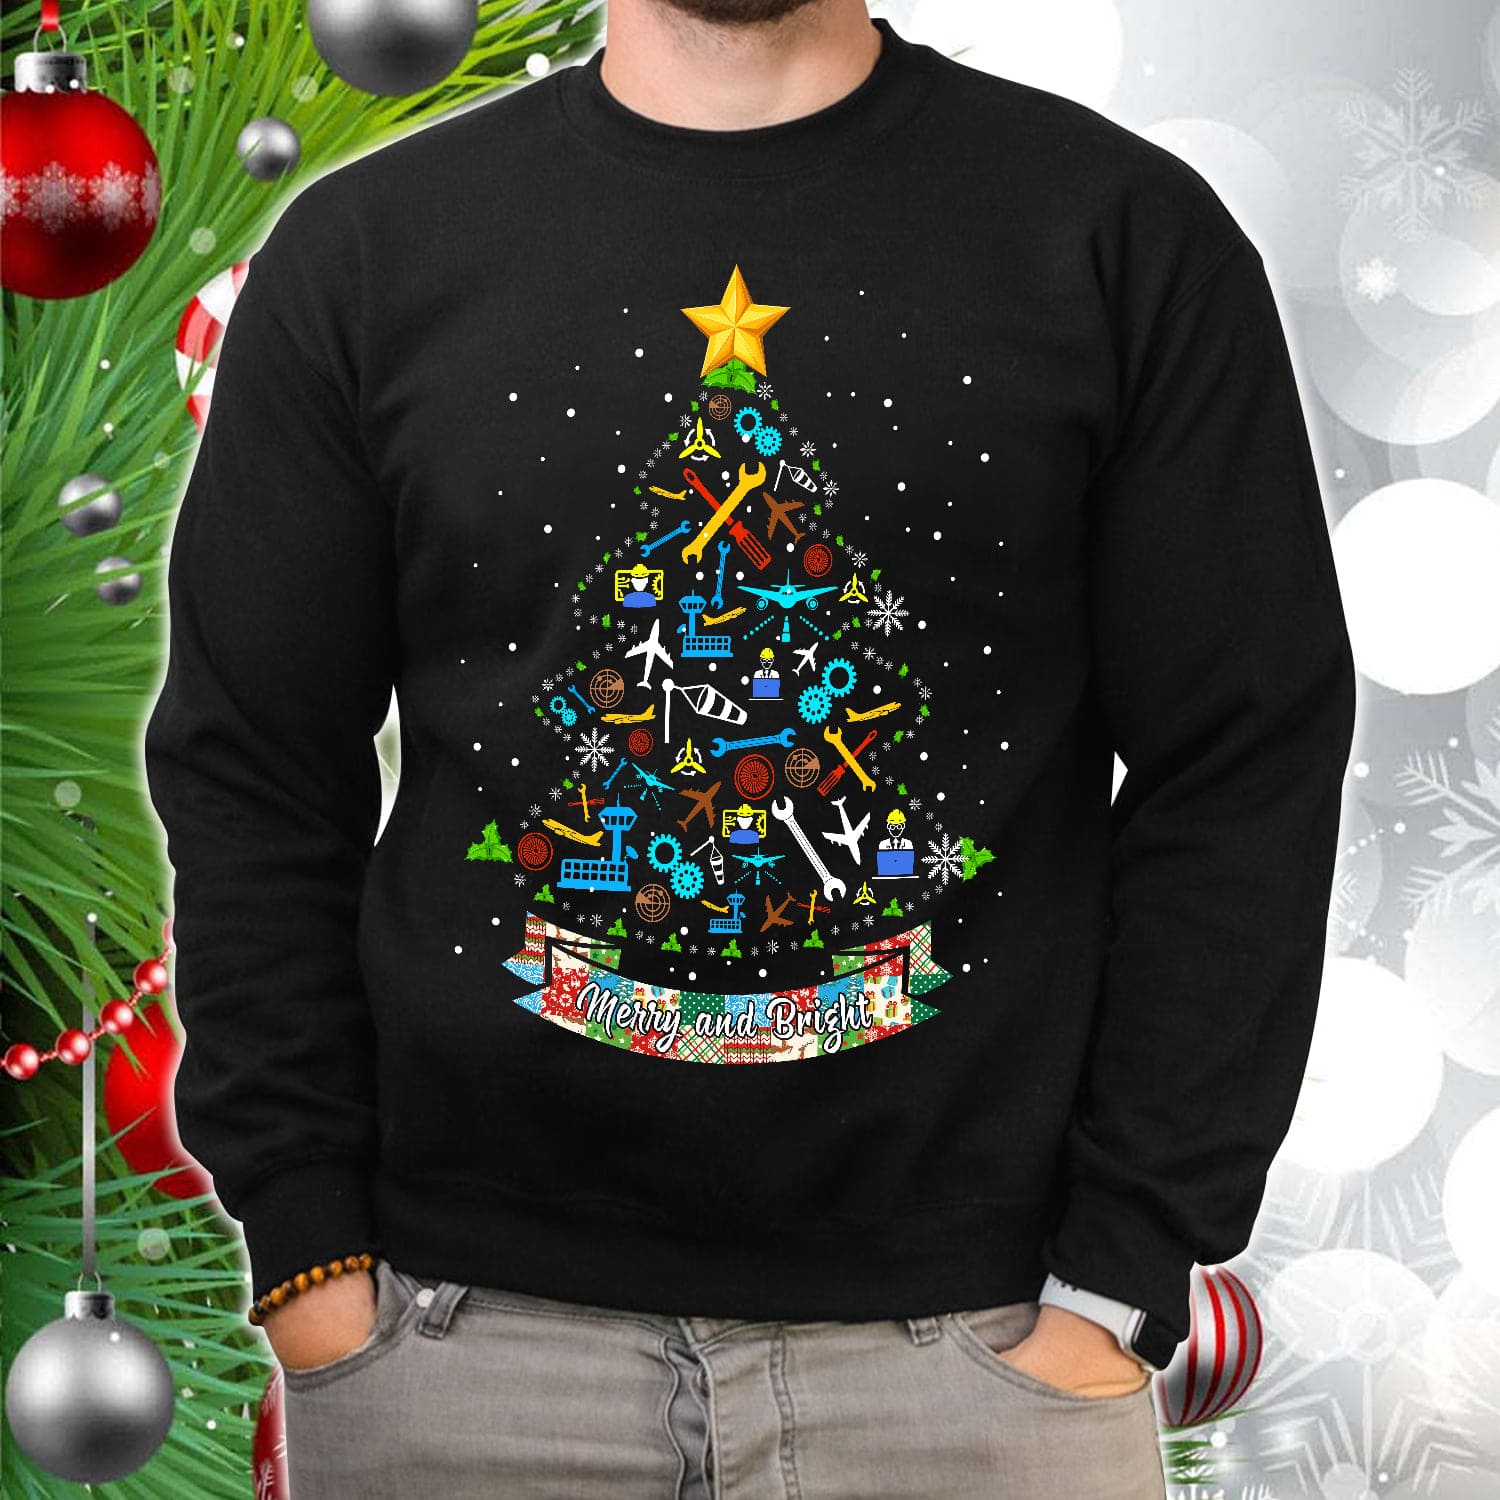 Merry and bright - Gift for pilot, Merry Christmas T-shirt